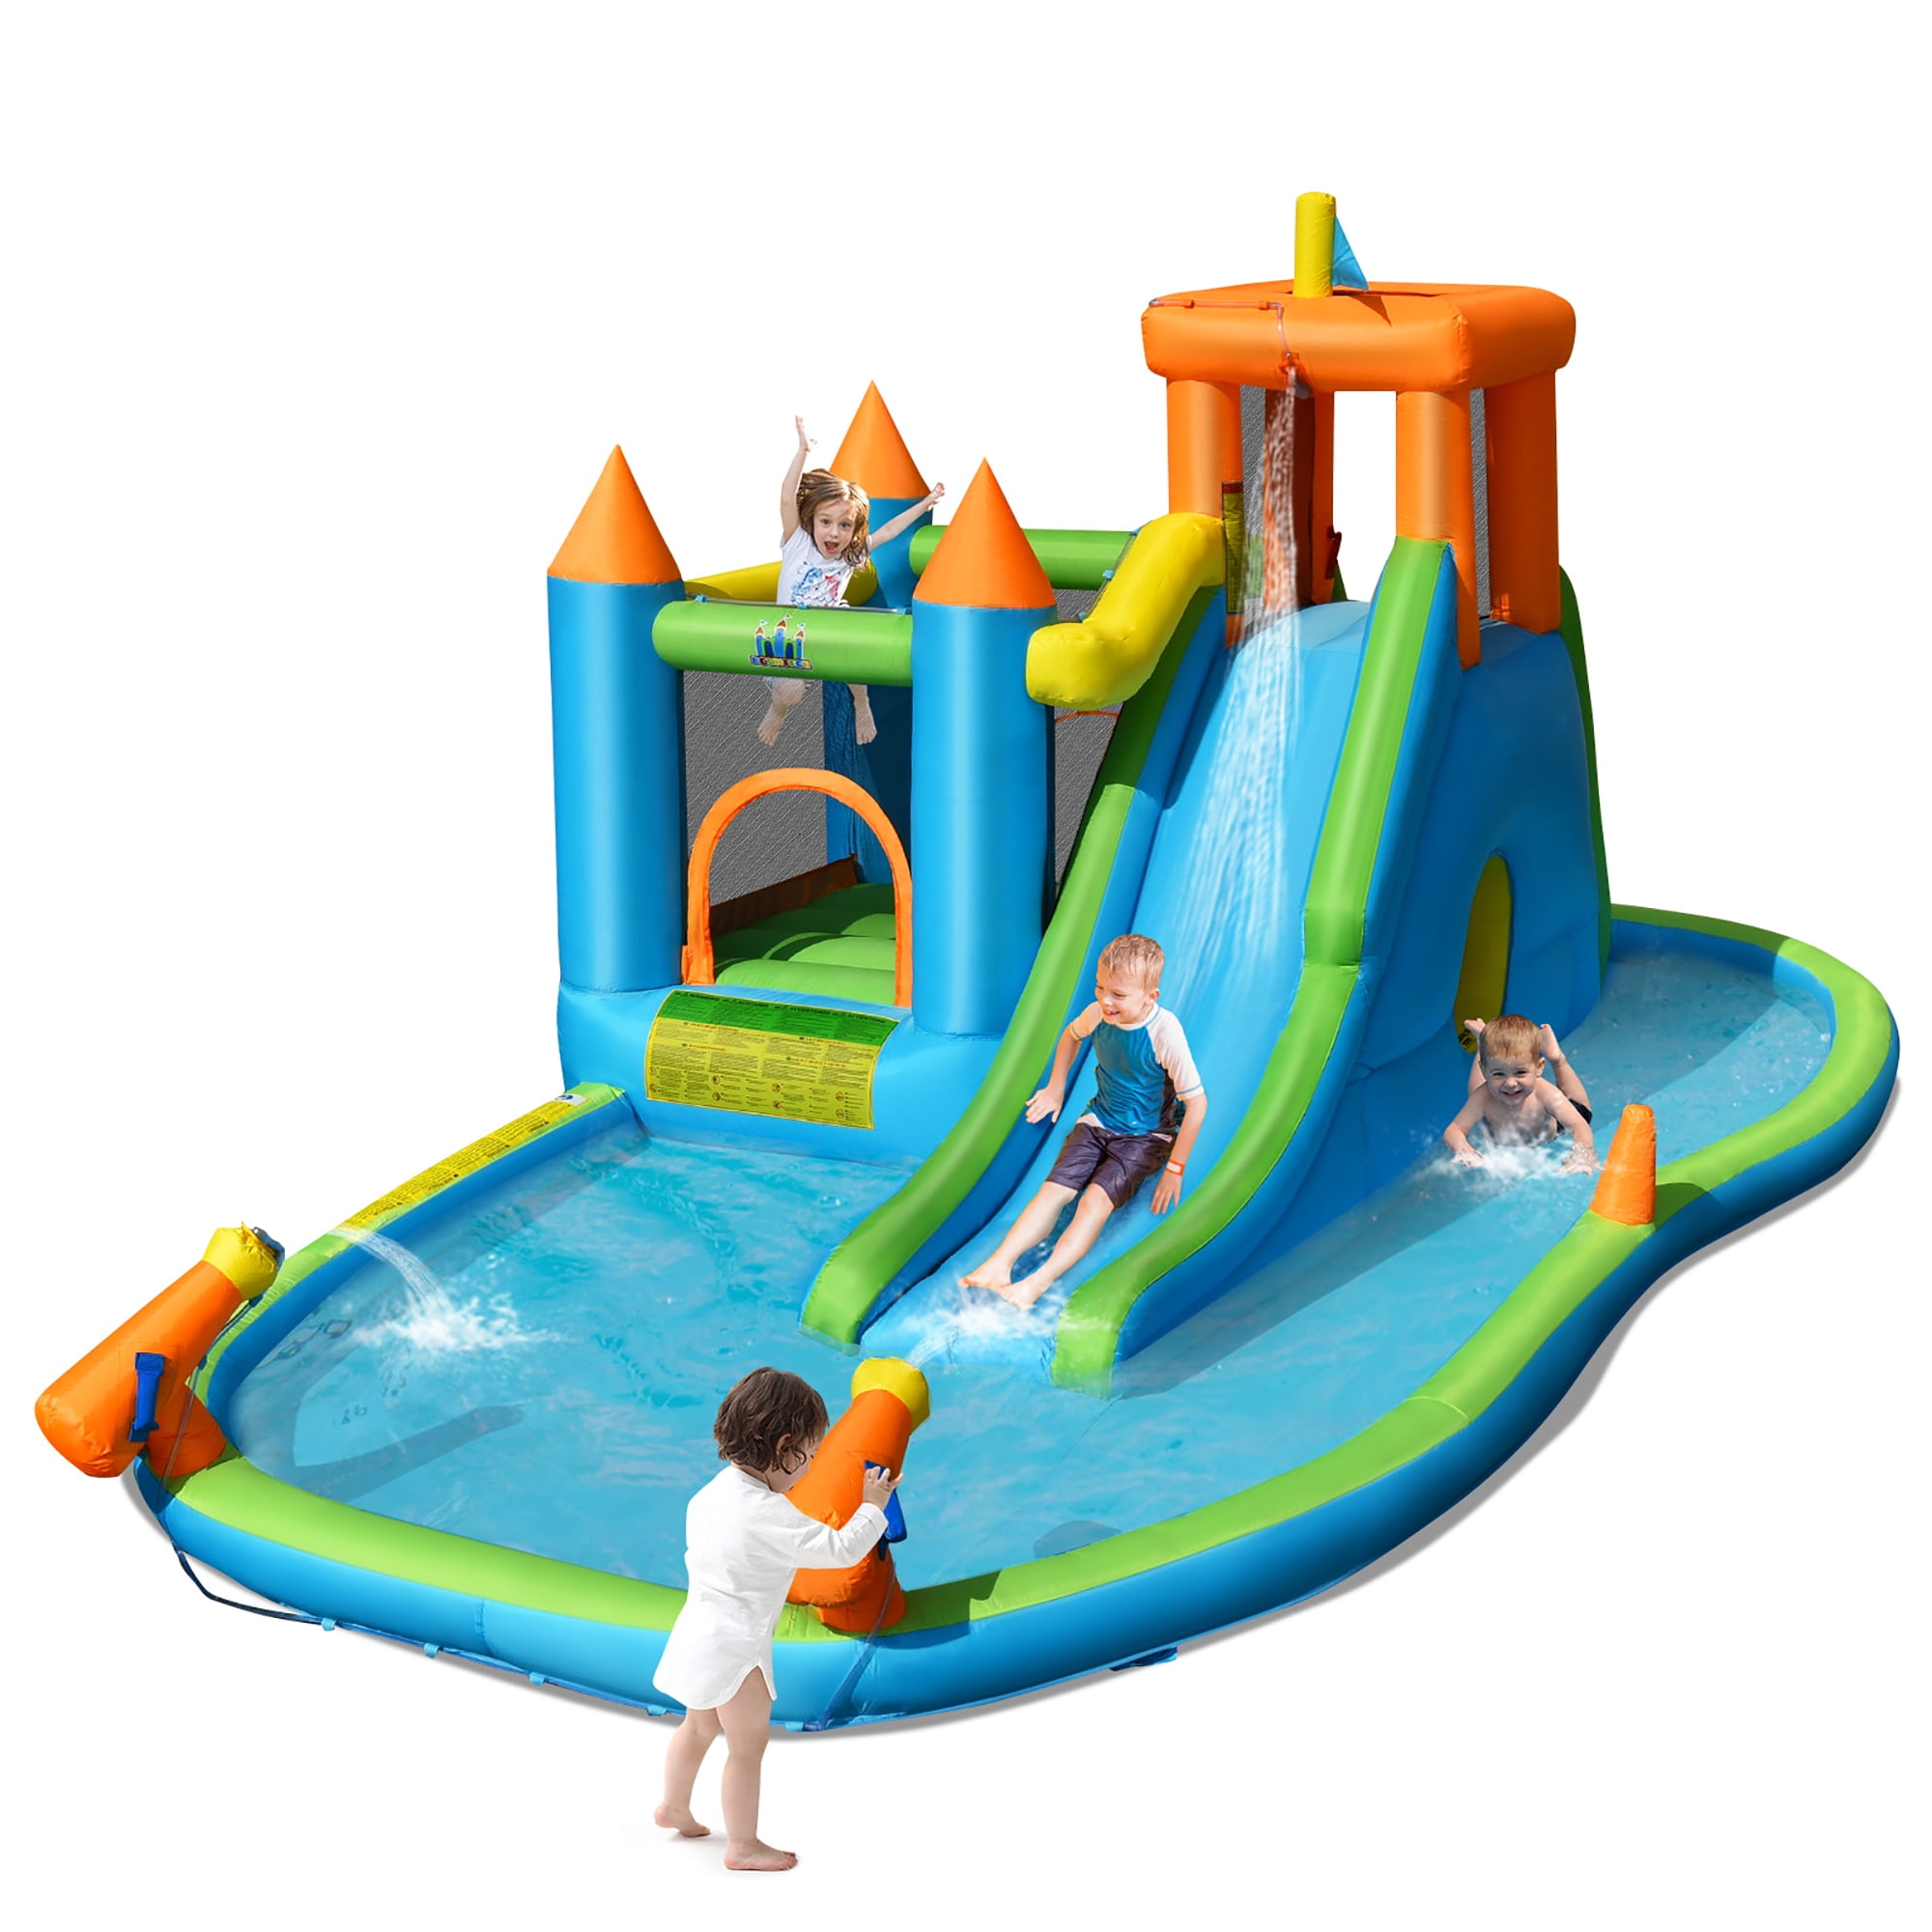 Kids Pool Water Play Centre Garden Paddling Outdoor Slides Inflatable Bouncy Set 